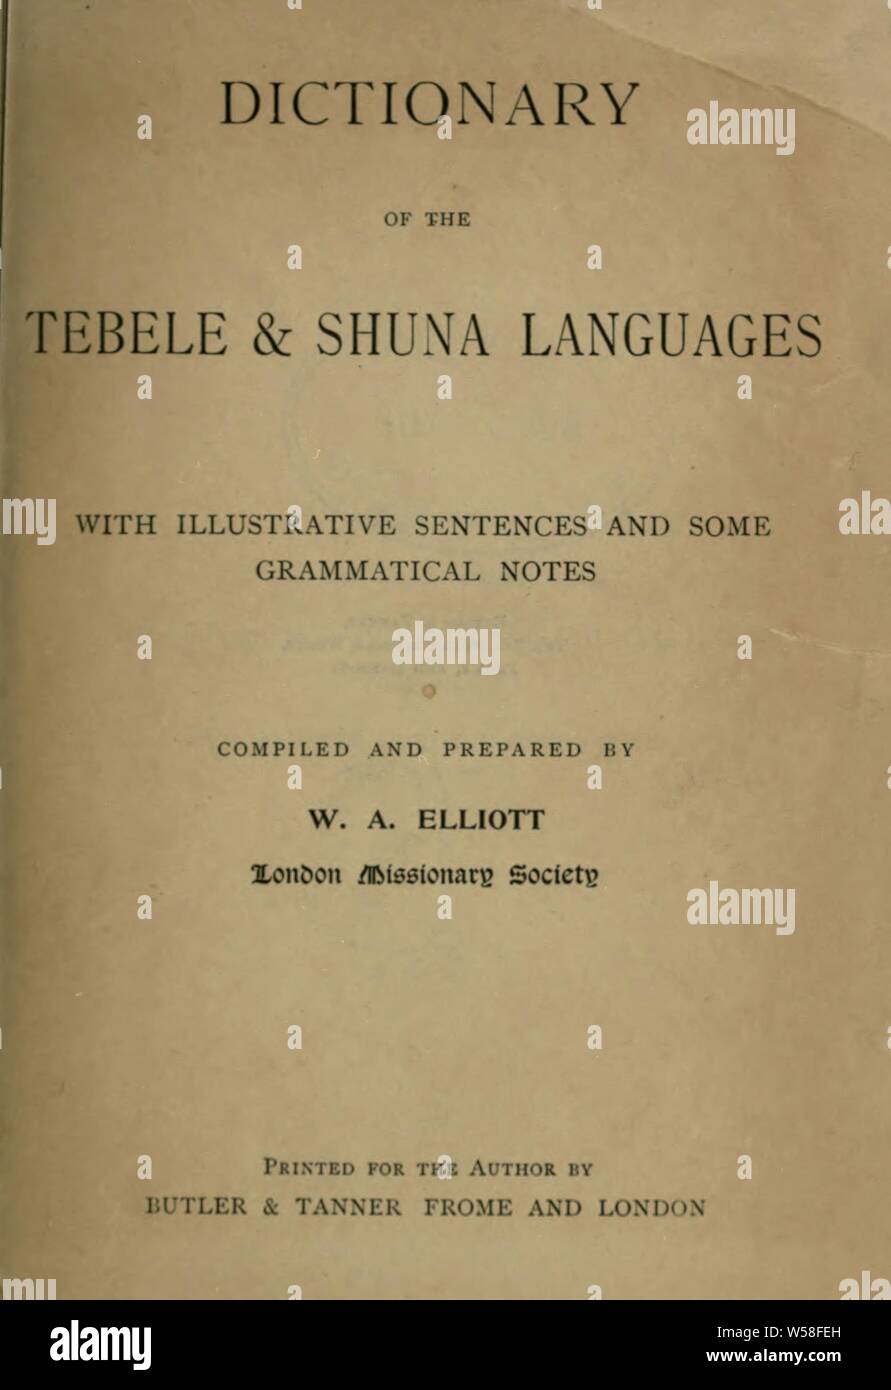 Dictionary of the Tebele & Shuna languages, with illustrative sentences and some grammatical notes. Compiled and prepared by W.A. Elliott : Elliott, William Allan, 1851 Stock Photo